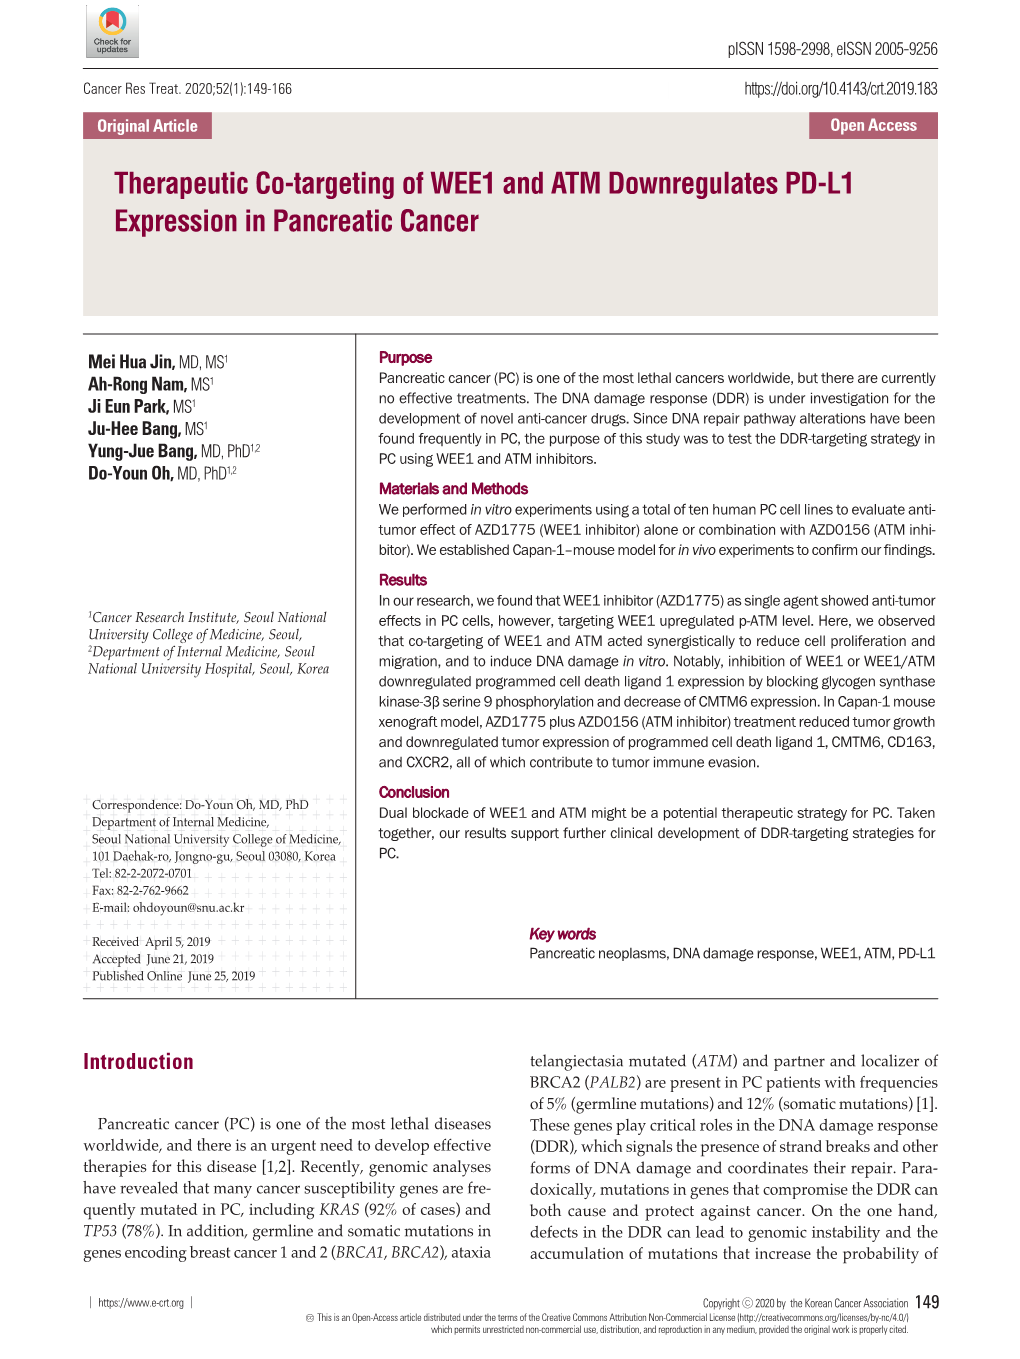 Therapeutic Co-Targeting of WEE1 and ATM Downregulates PD-L1 Expression in Pancreatic Cancer